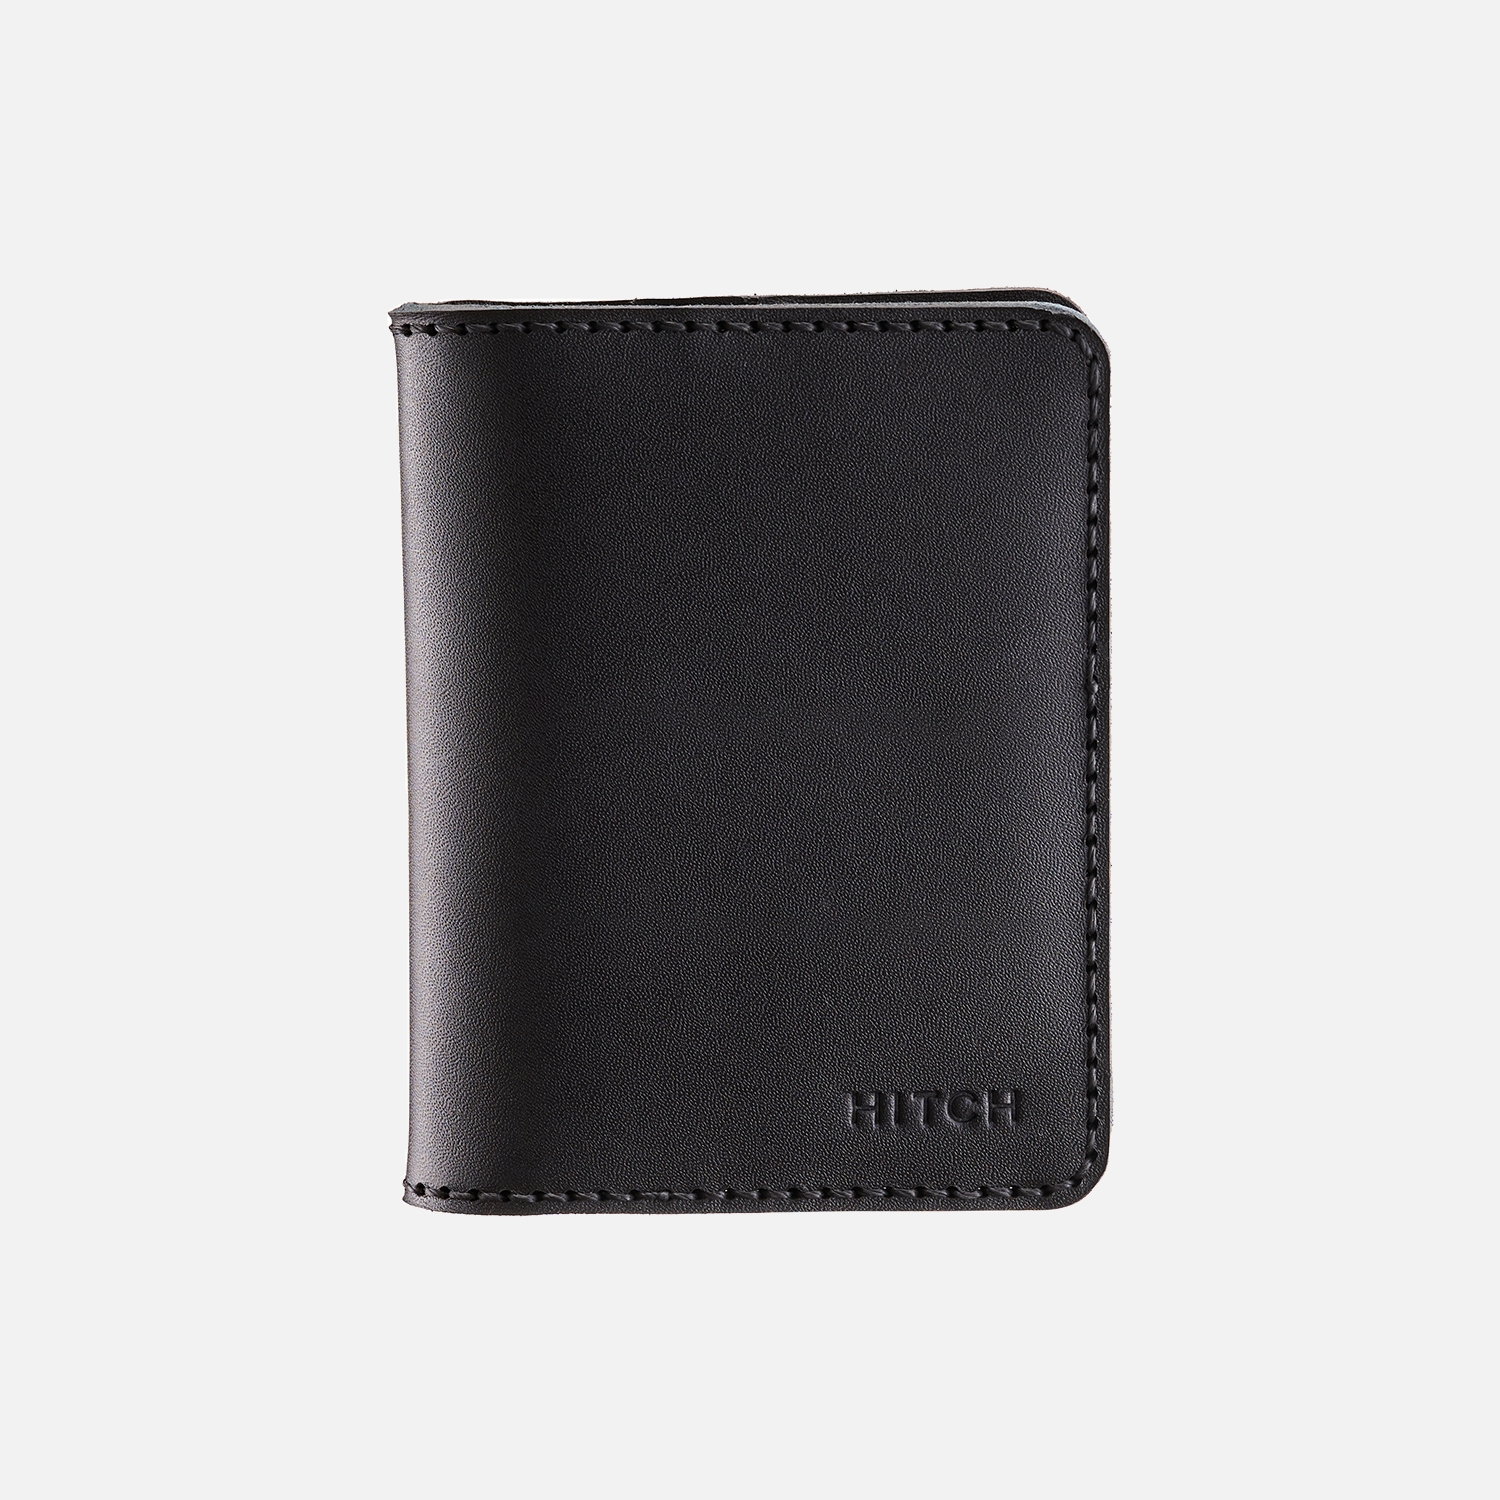 Black leather bifold wallet with stitched edges on a white background.